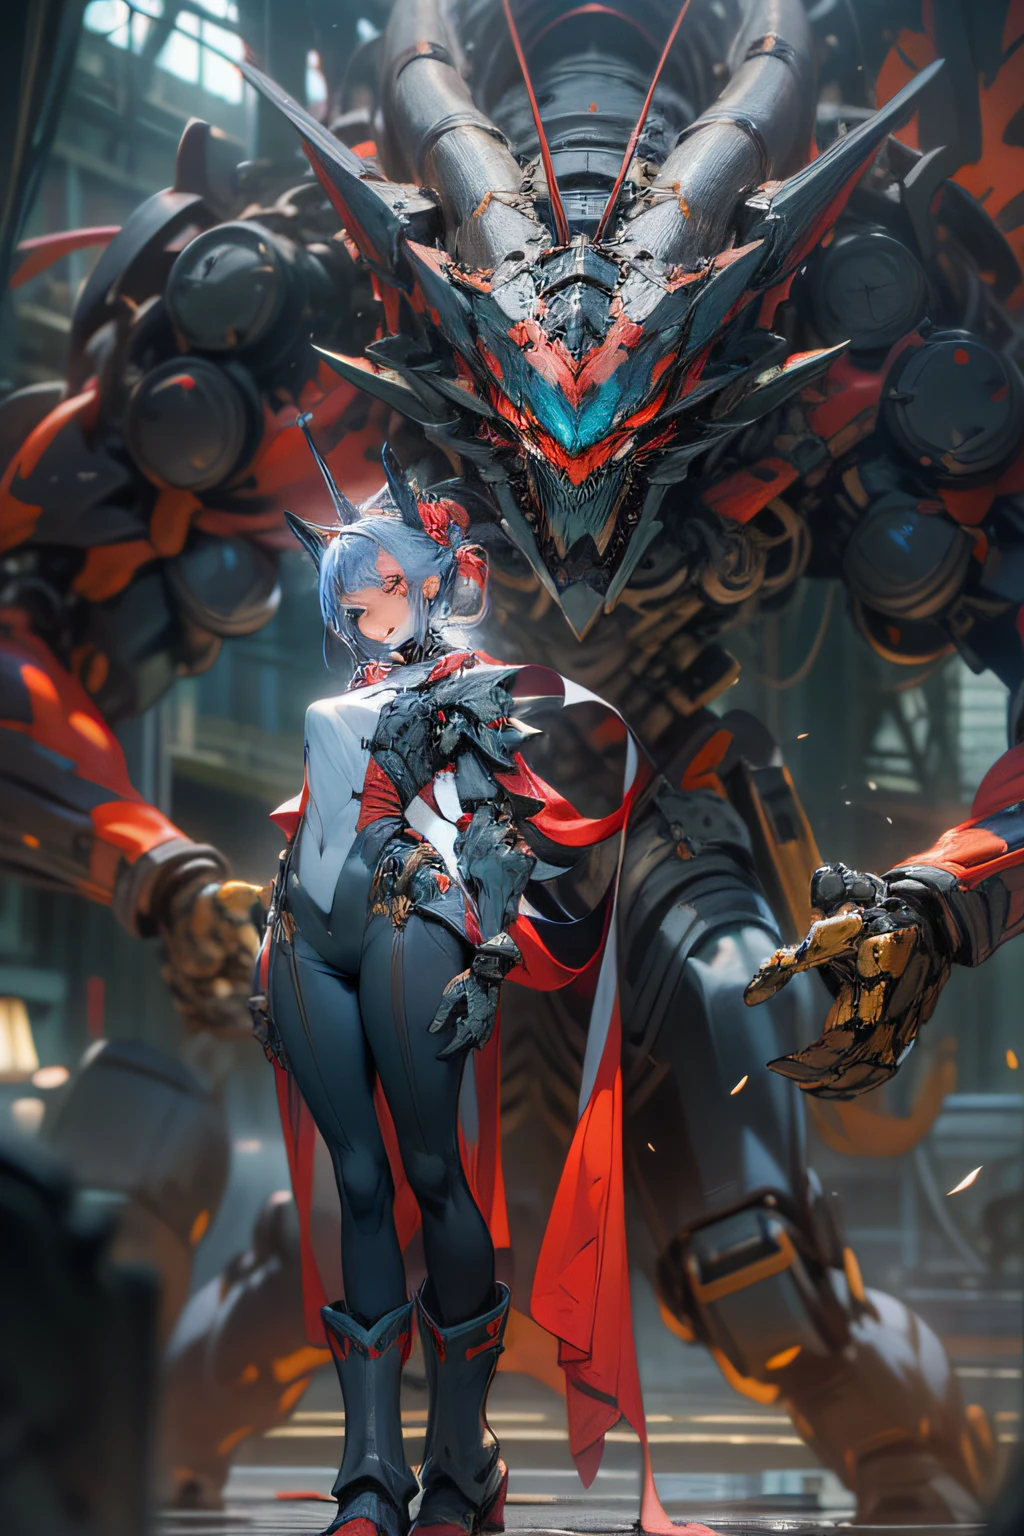 Dragon ear, at night,huge and complex technical background,(masterpiece),(detailed),(intricate details),(realistic, photo-realistic:1.1),i1girl,solo,(full body:1.0),blue fire,gear,giant robot,machine,damage armor,glove,machinery suit,(machinery boots),Mecha,science fit,updo,wearing mechanical equipment,nice ,Standing posture of model,Twist your body slightly,(Tall and elegant,slender figure:1.4),Dragon ear ,Dance posture,Sexy posture,Tall and elegant,Metal Takazawa,Gorgeous,Science Filament,(Red and black color case:1.0), (masterpiece, best quality, high quality, highres, ultra-detailed),